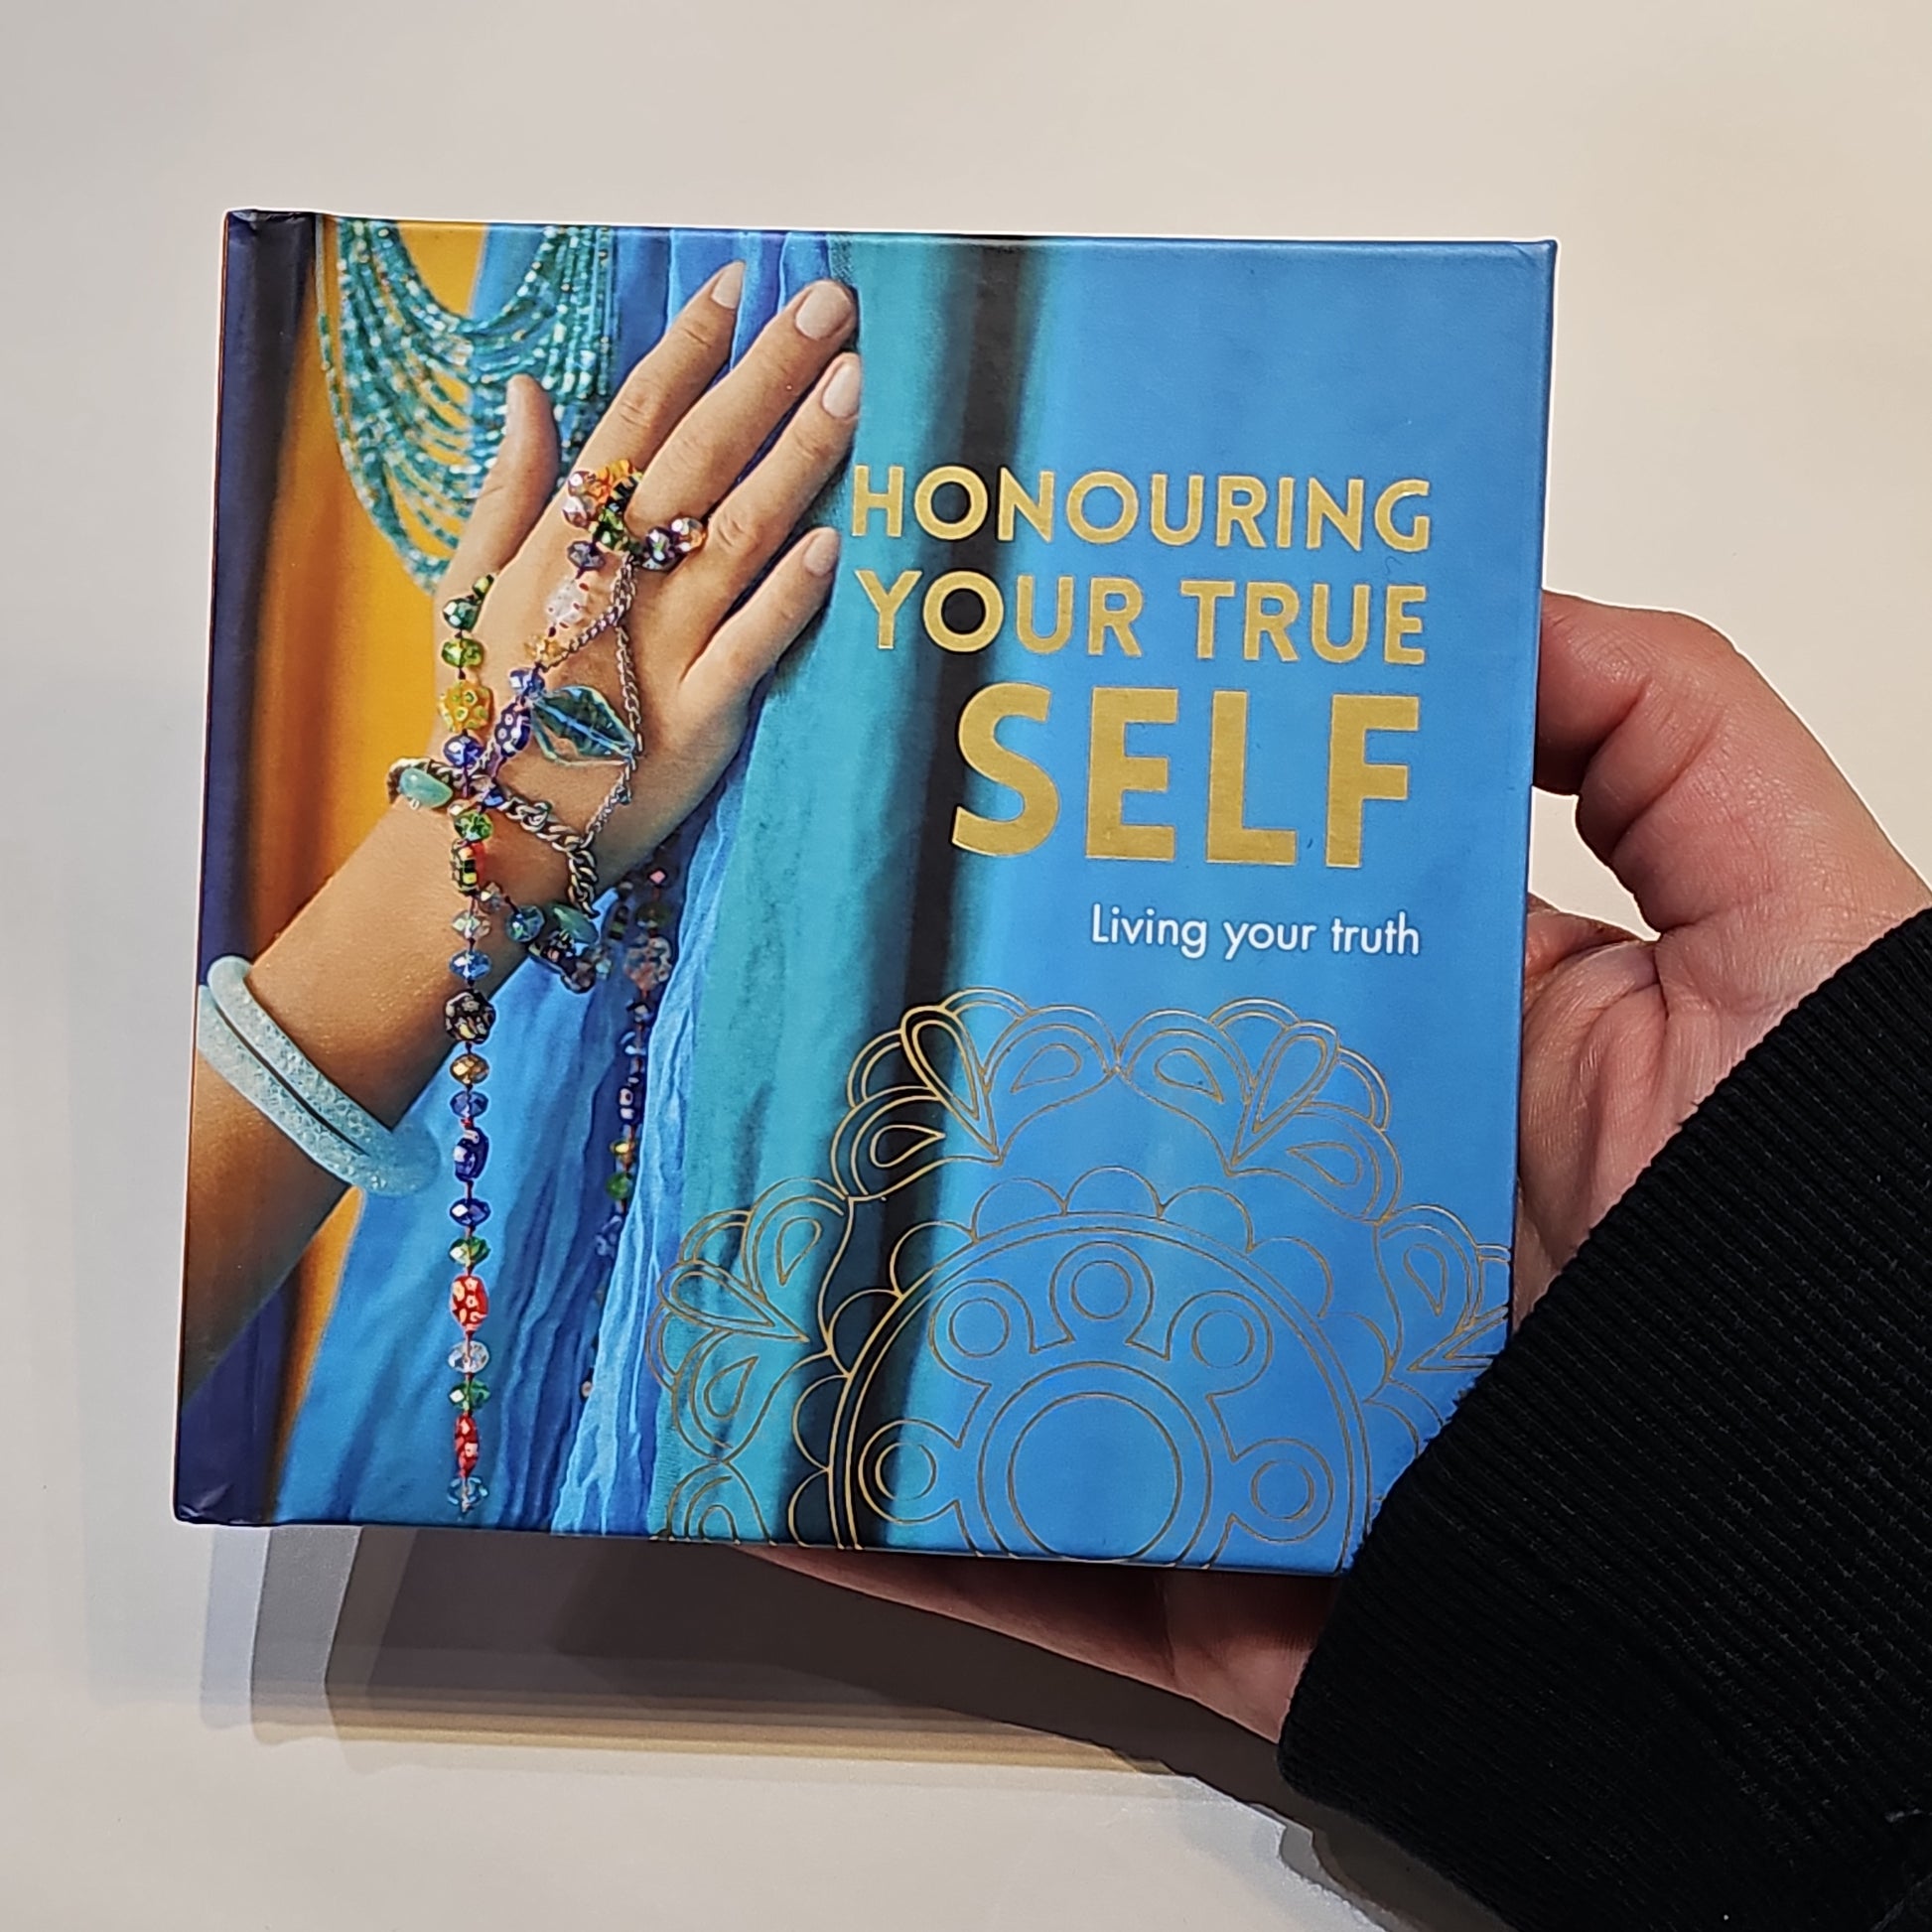 Honouring your true self - mindfulness book - Rivendell Shop